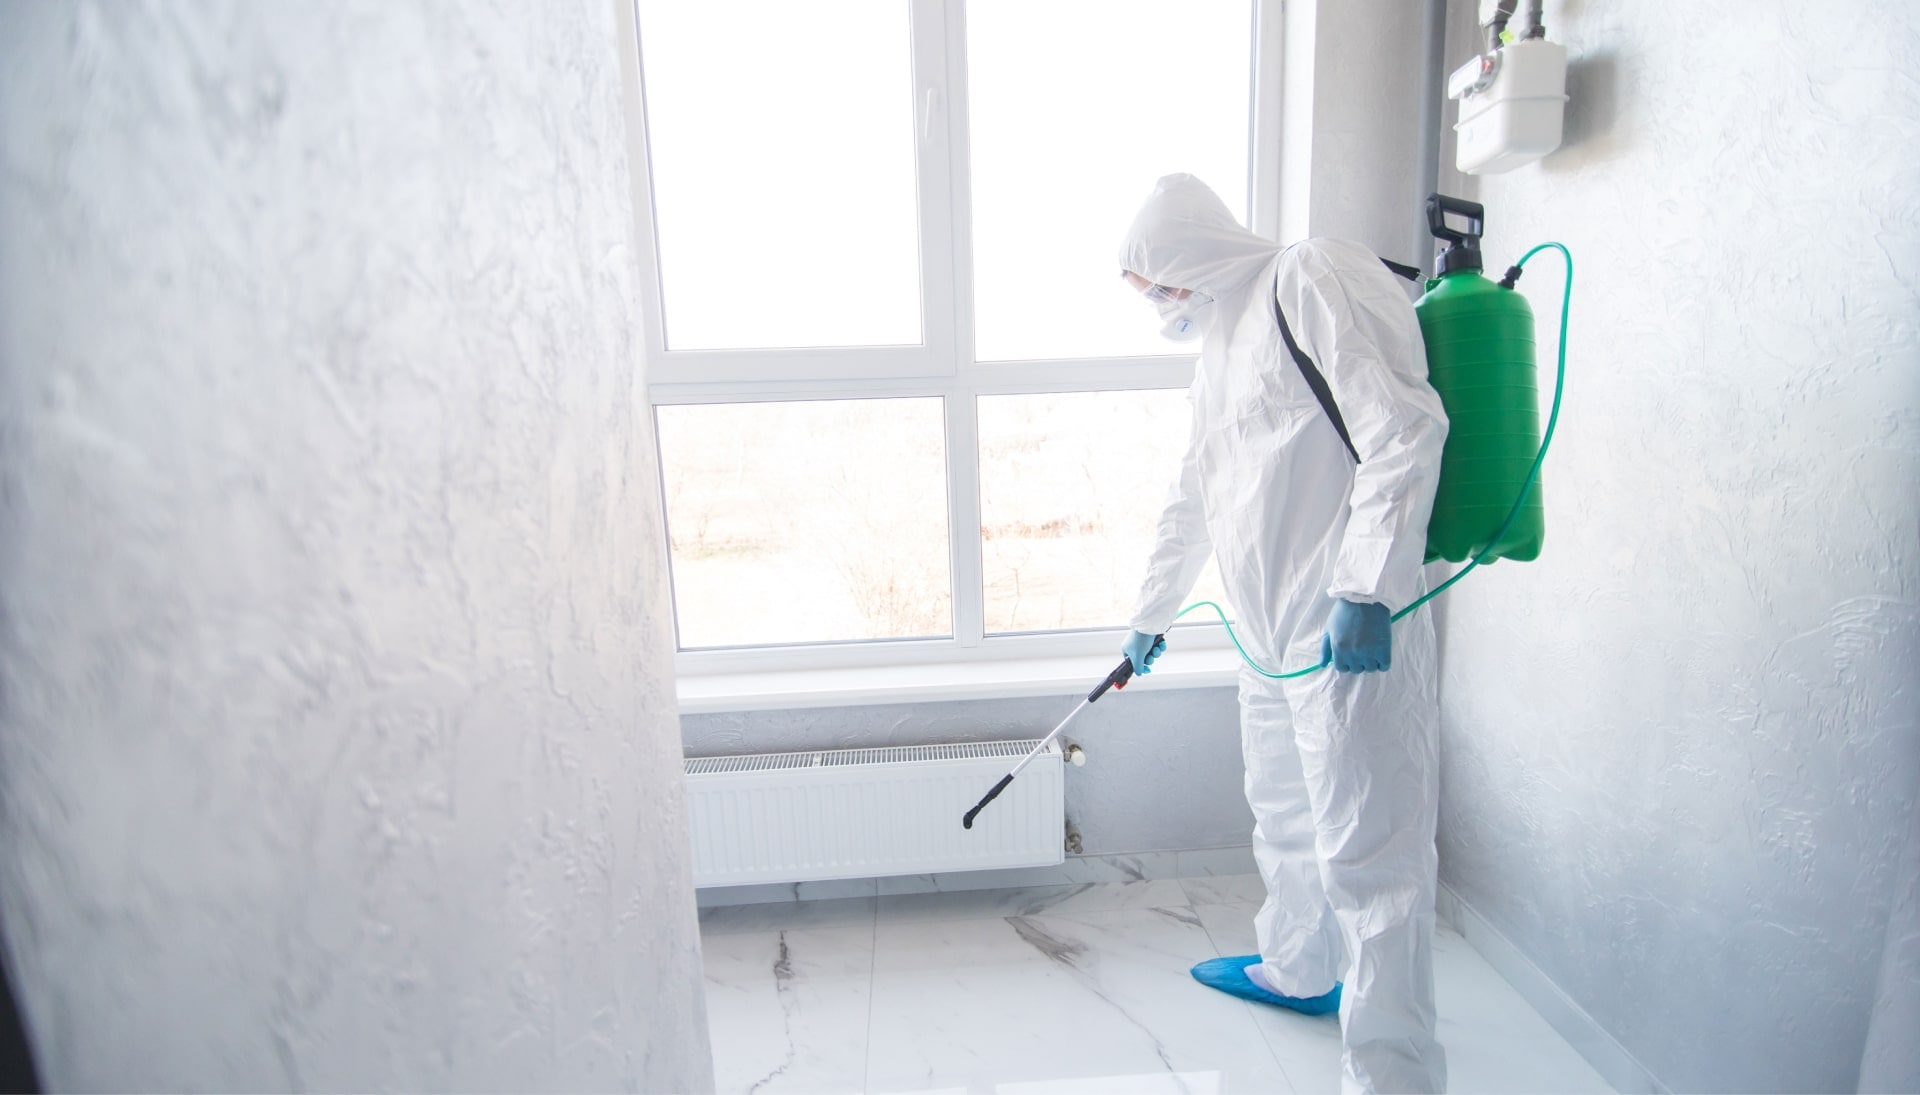 We provide the highest-quality mold inspection, testing, and removal services in the St Louis, Missouri area.